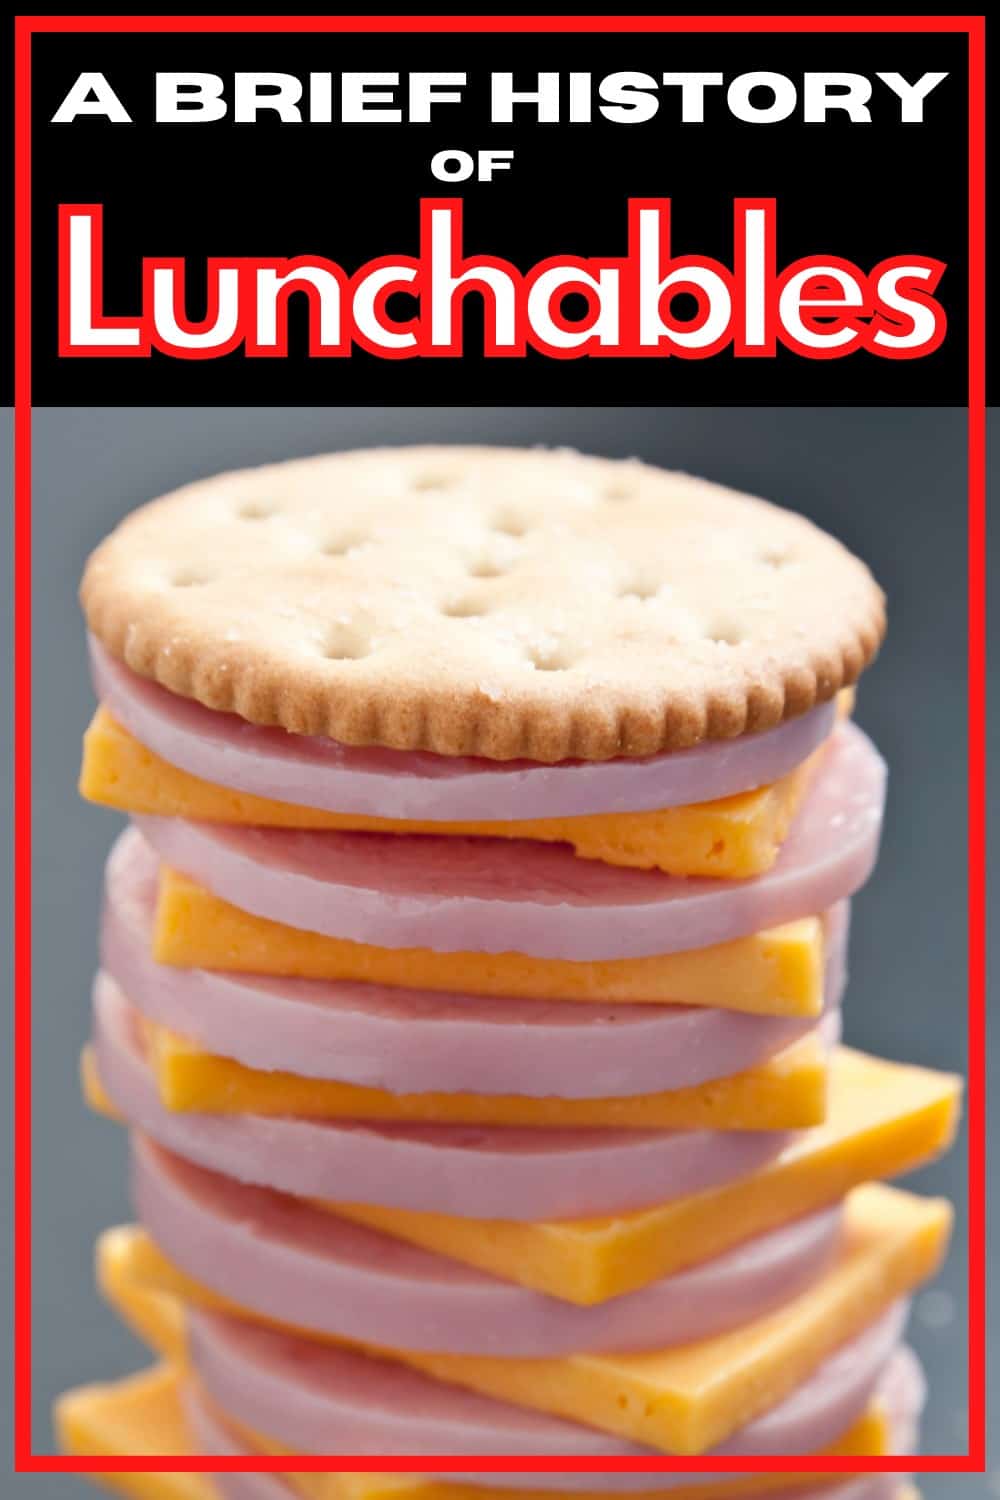 Lunchables were invented in 1985